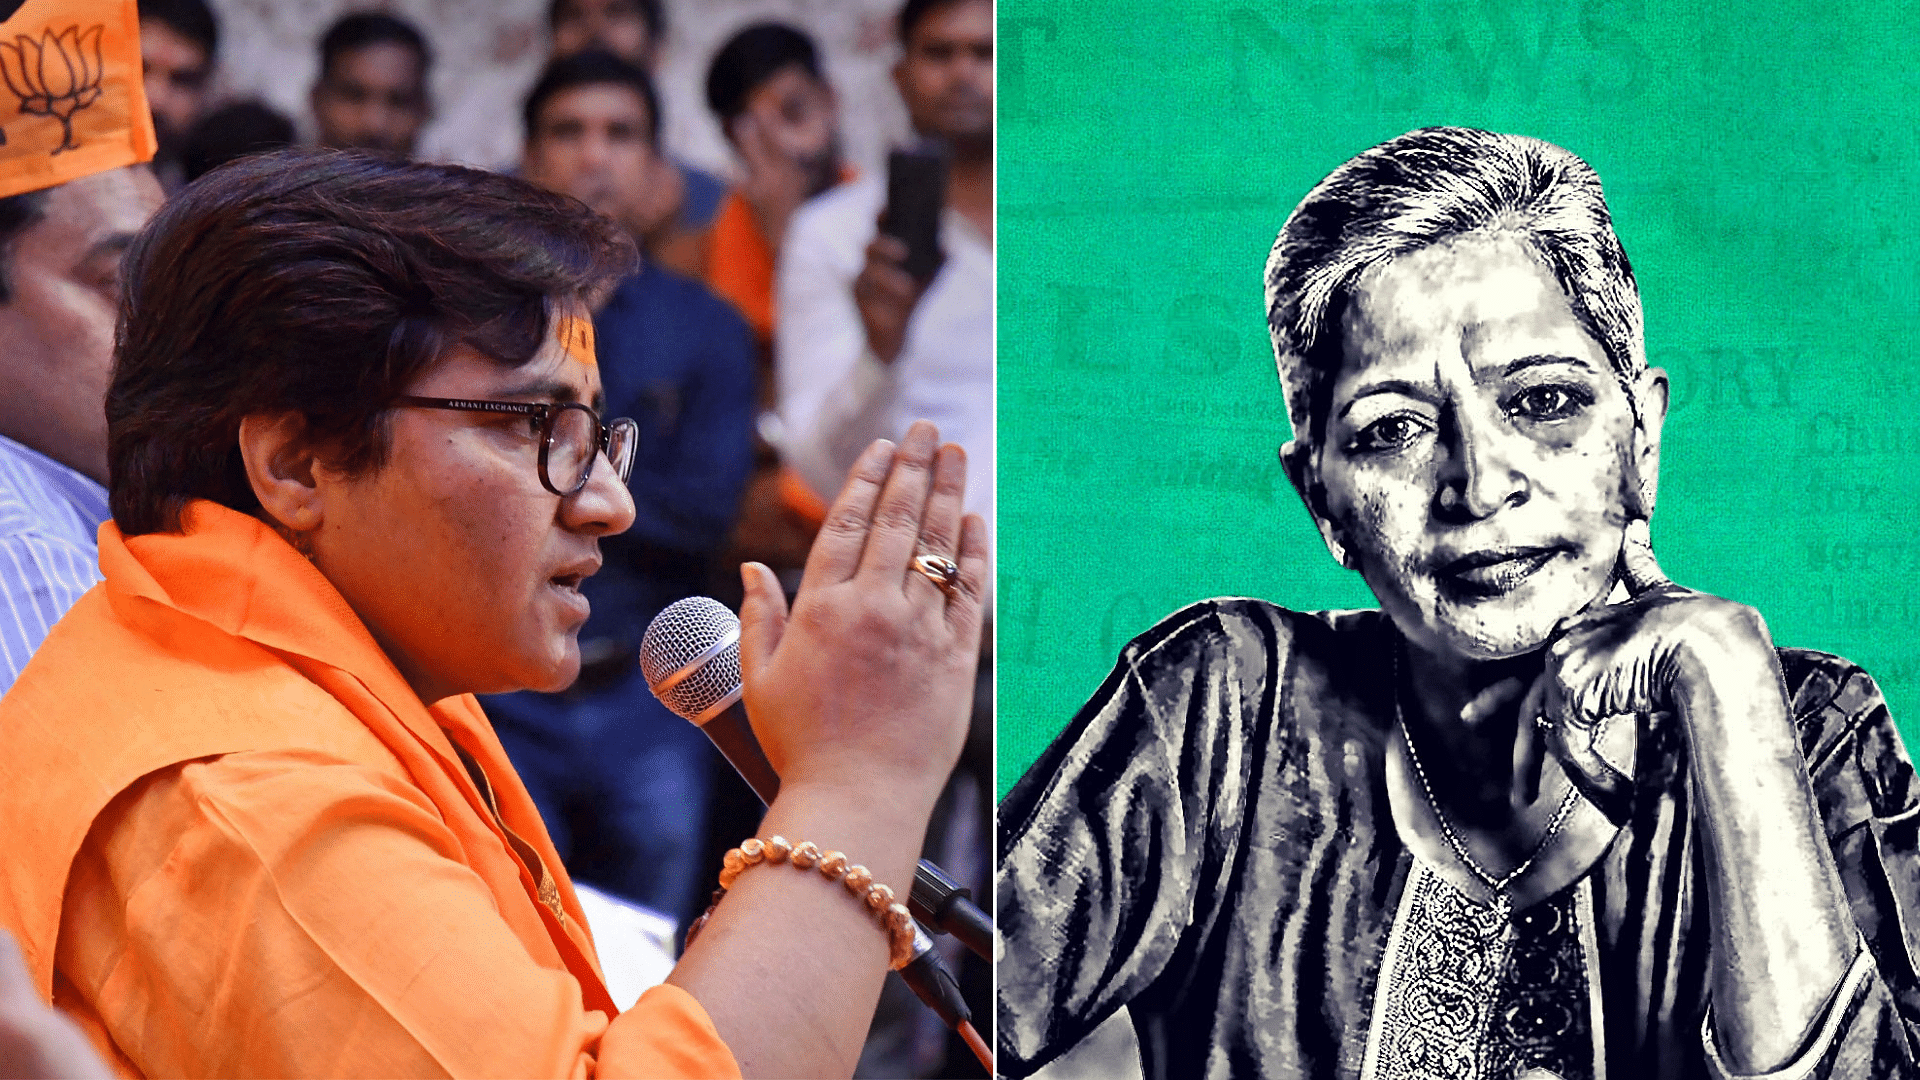 Pragya’s co-accused in Malegaon blast have reportedly been named as bomb trainers by suspects in Gauri Lankesh’s murder.